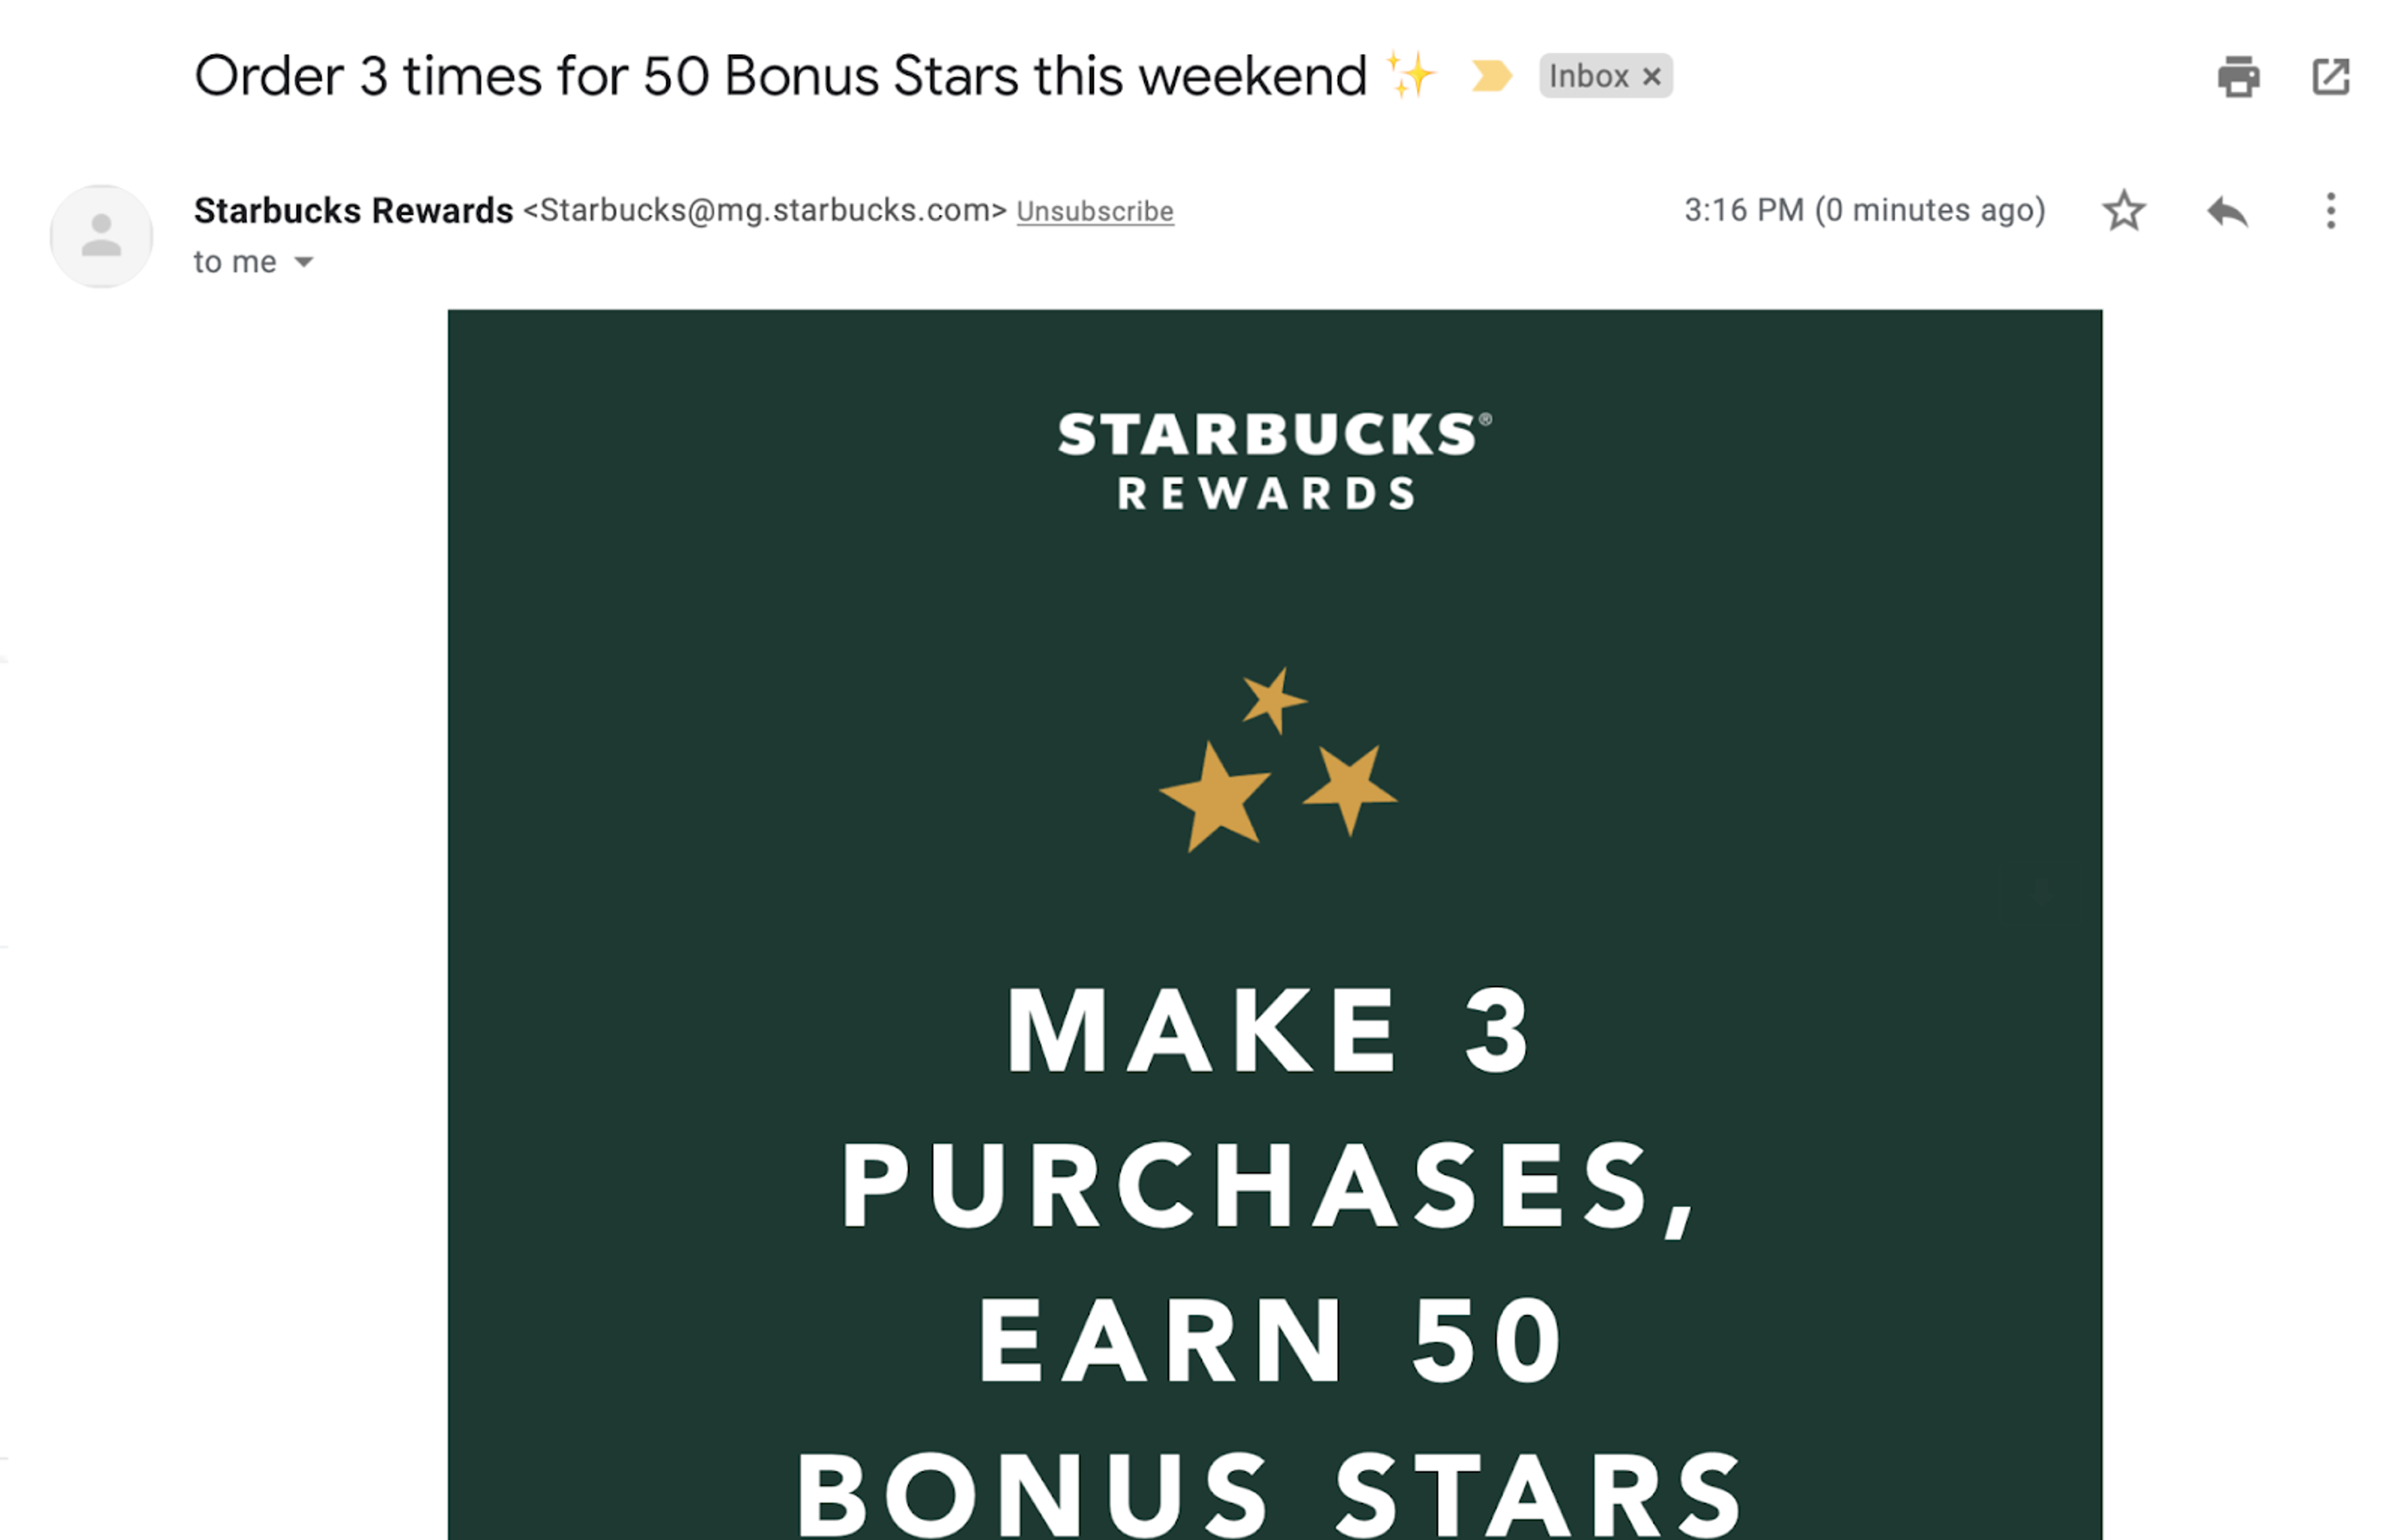 Starbuck's classic loyalty rewards gamification system